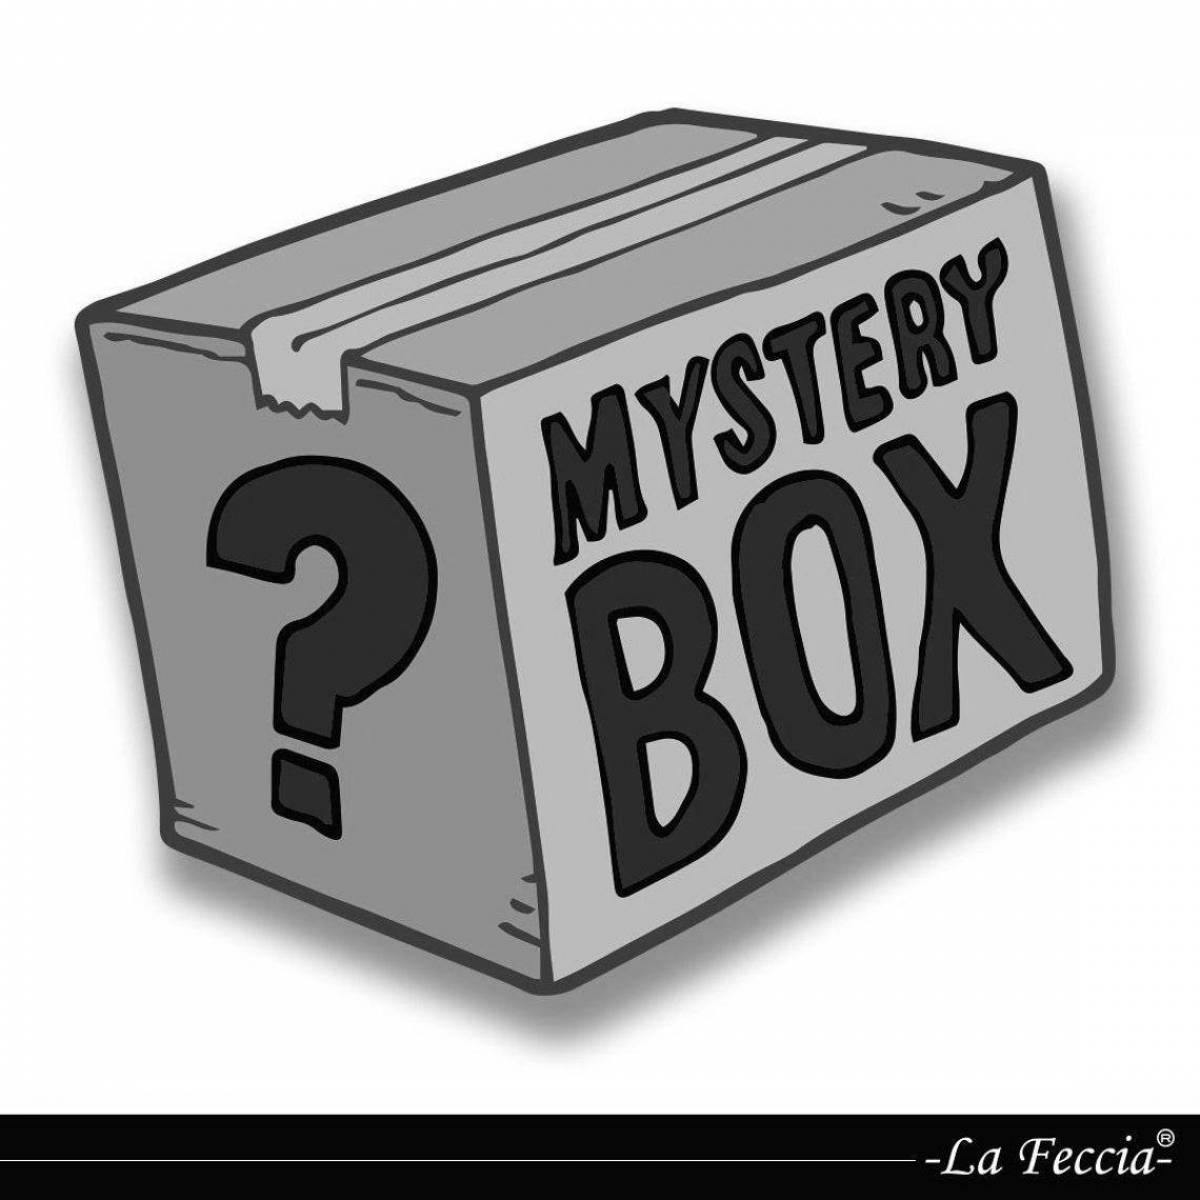 Splendid mystery boxing coloring book